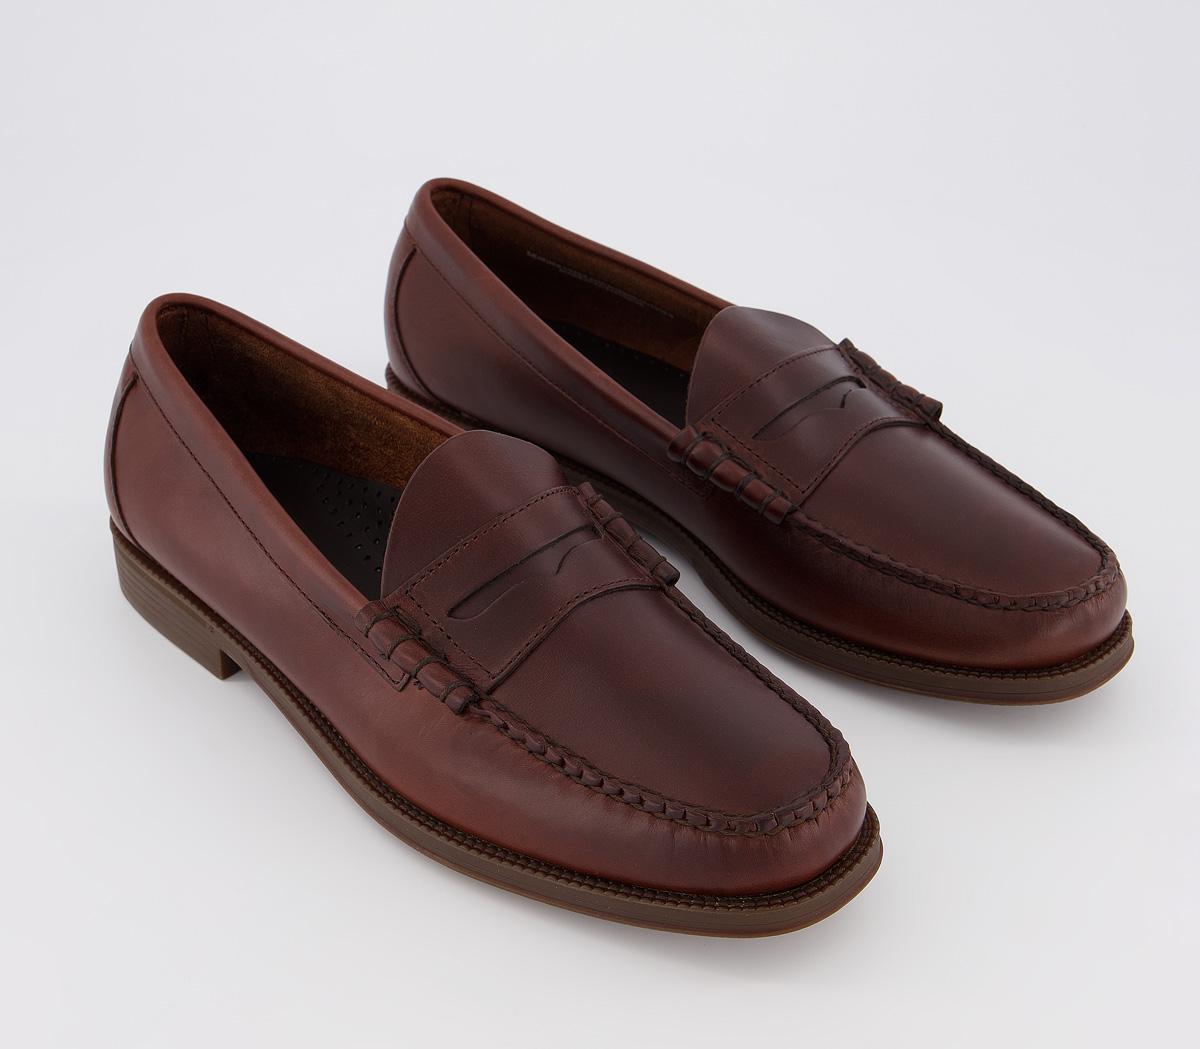 G.H Bass & Co Easy Weejuns II Larson Loafers Dark Brown - Men’s Loafers